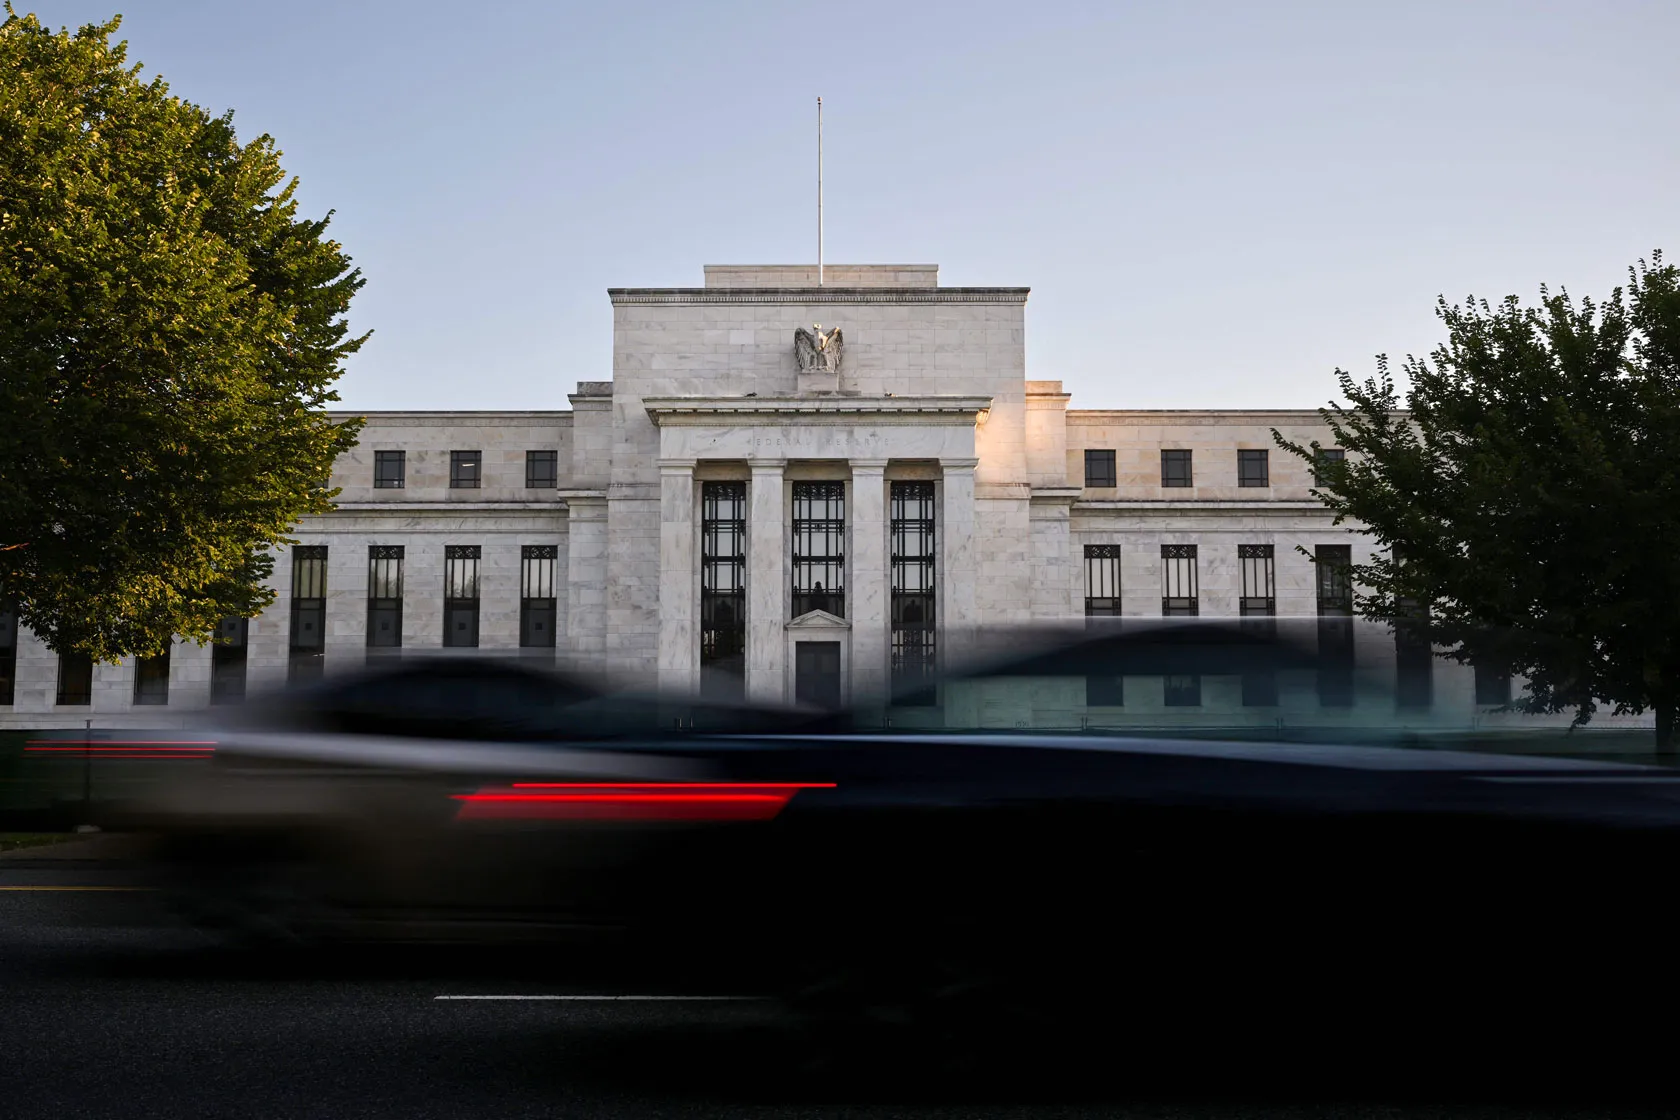 Cars drive past the U.S. Federal Reserve building in Washington, D.C.